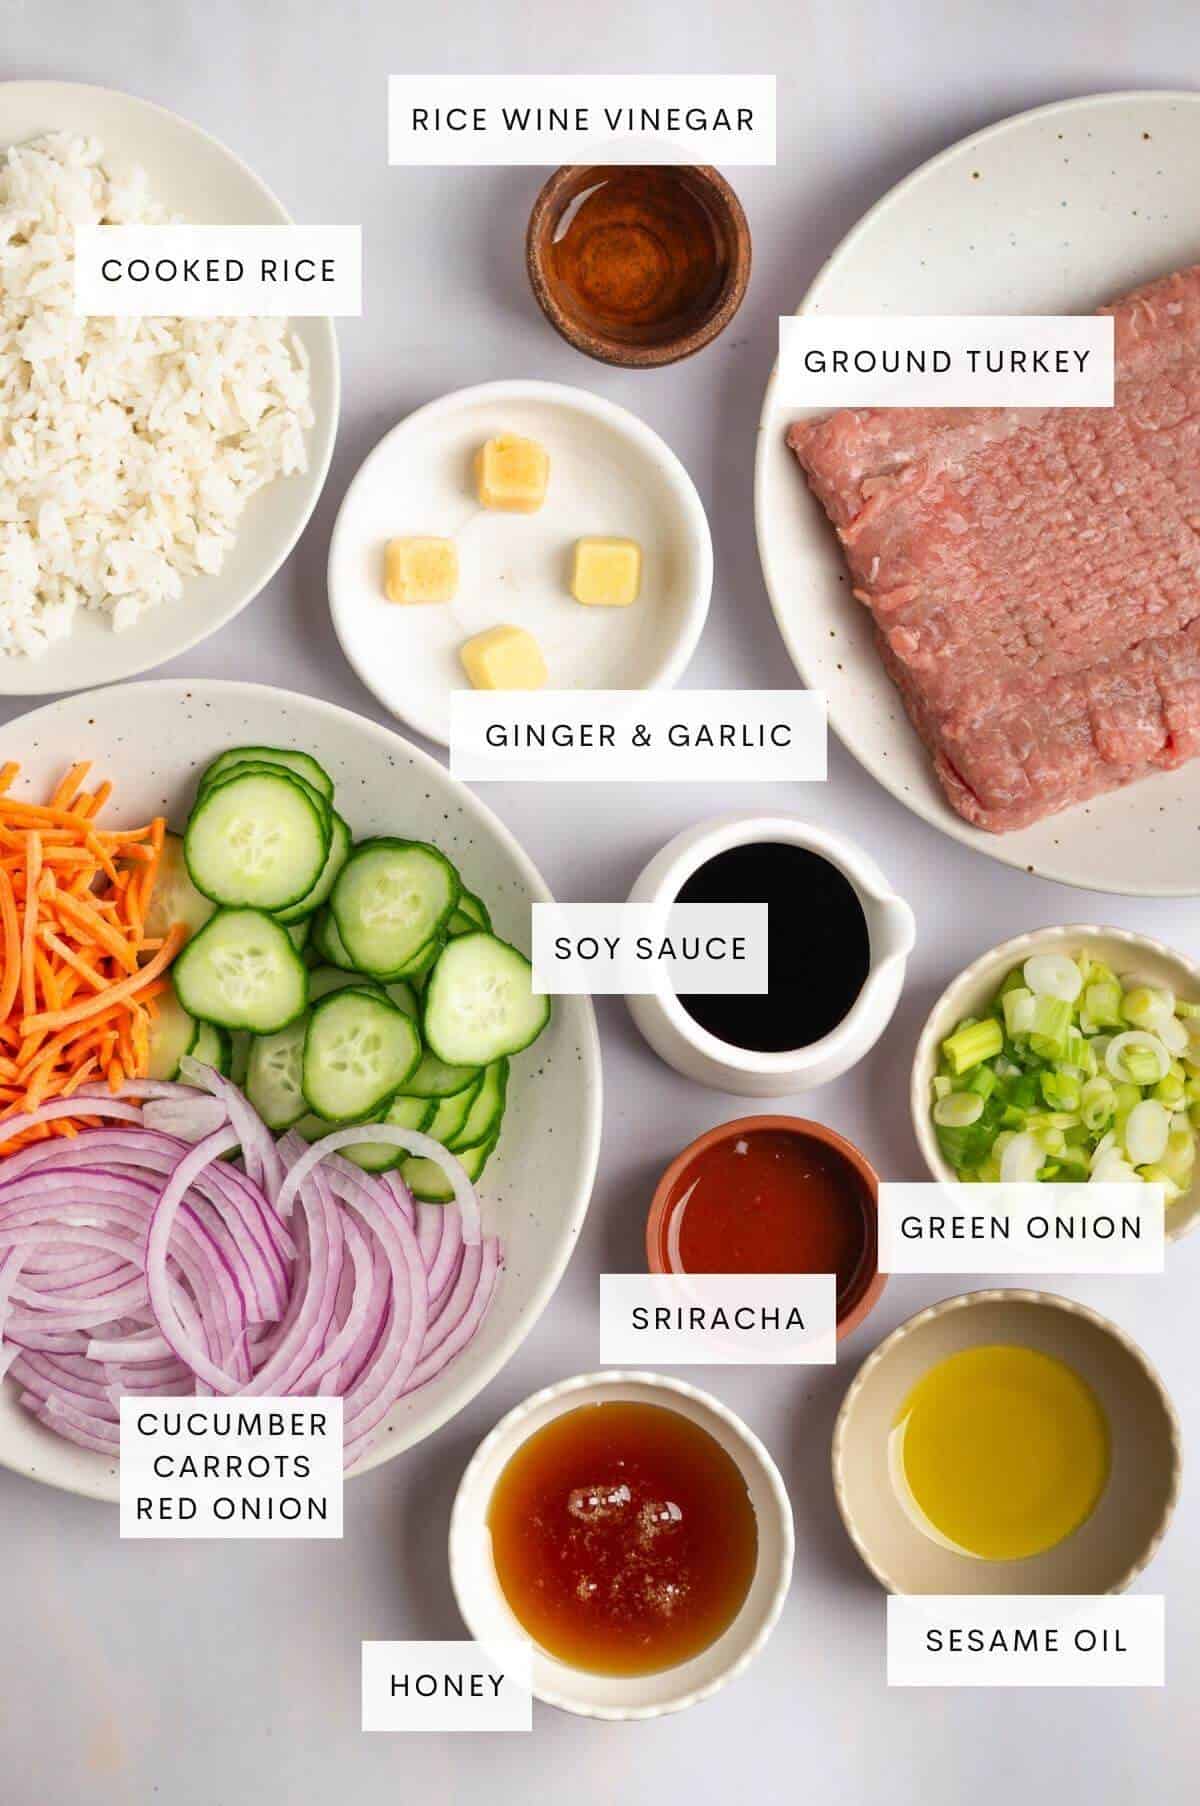 Ingredients needed for Korean inspired ground turkey bowls: rice, ground turkey, rice wine vinegar, ginger, garlic, soy sauce, green onion, Sriracha, sesame oil, honey, and sliced cucumbers, carrots, and red onion.